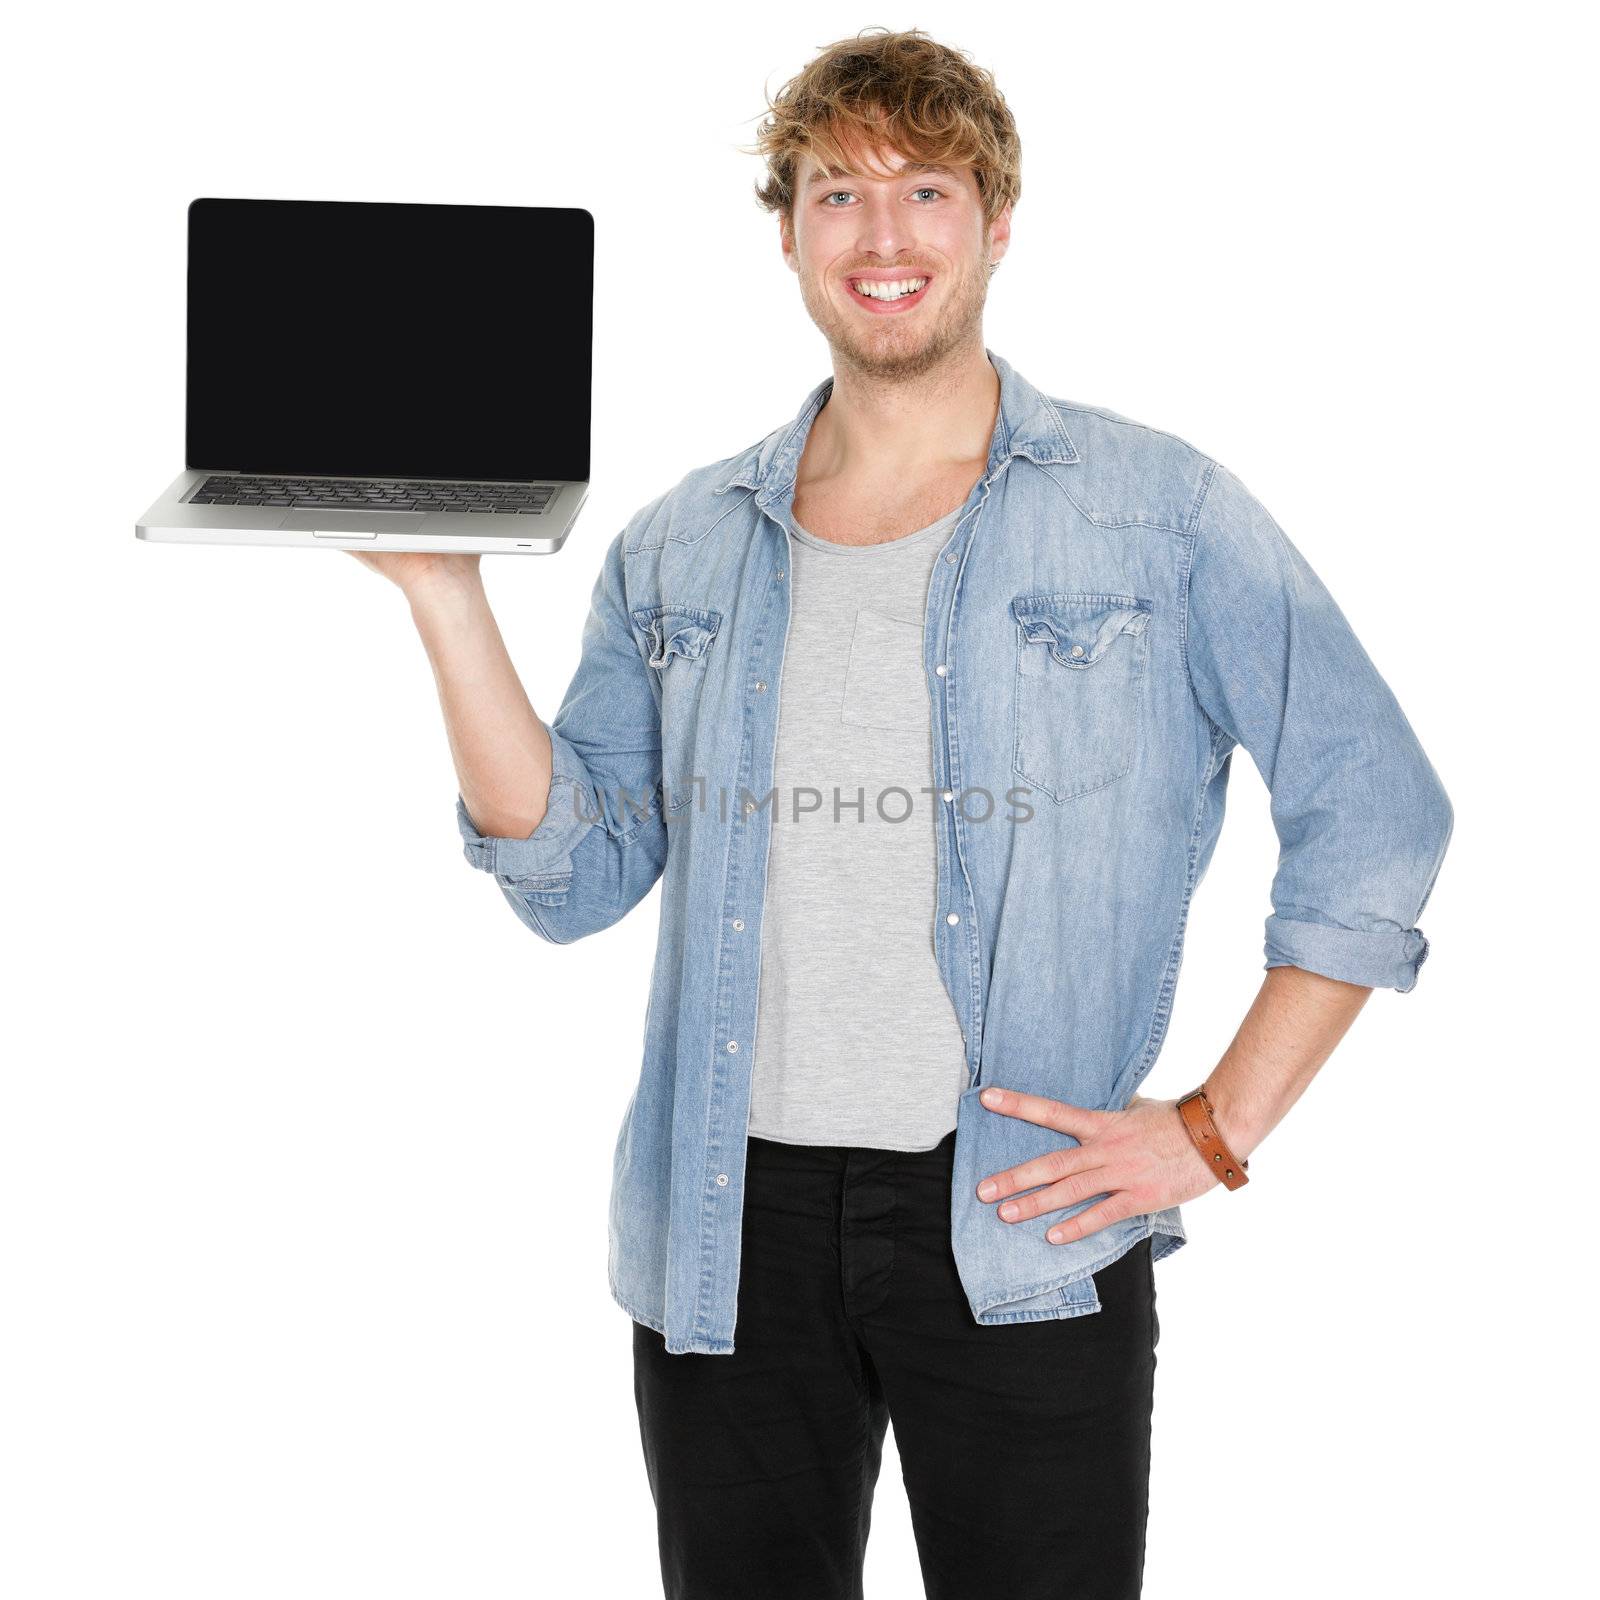 Young man student showing blank laptop computer screen smiling happy. Male university student or casual young man holding laptop smiling happy isolated on white background.